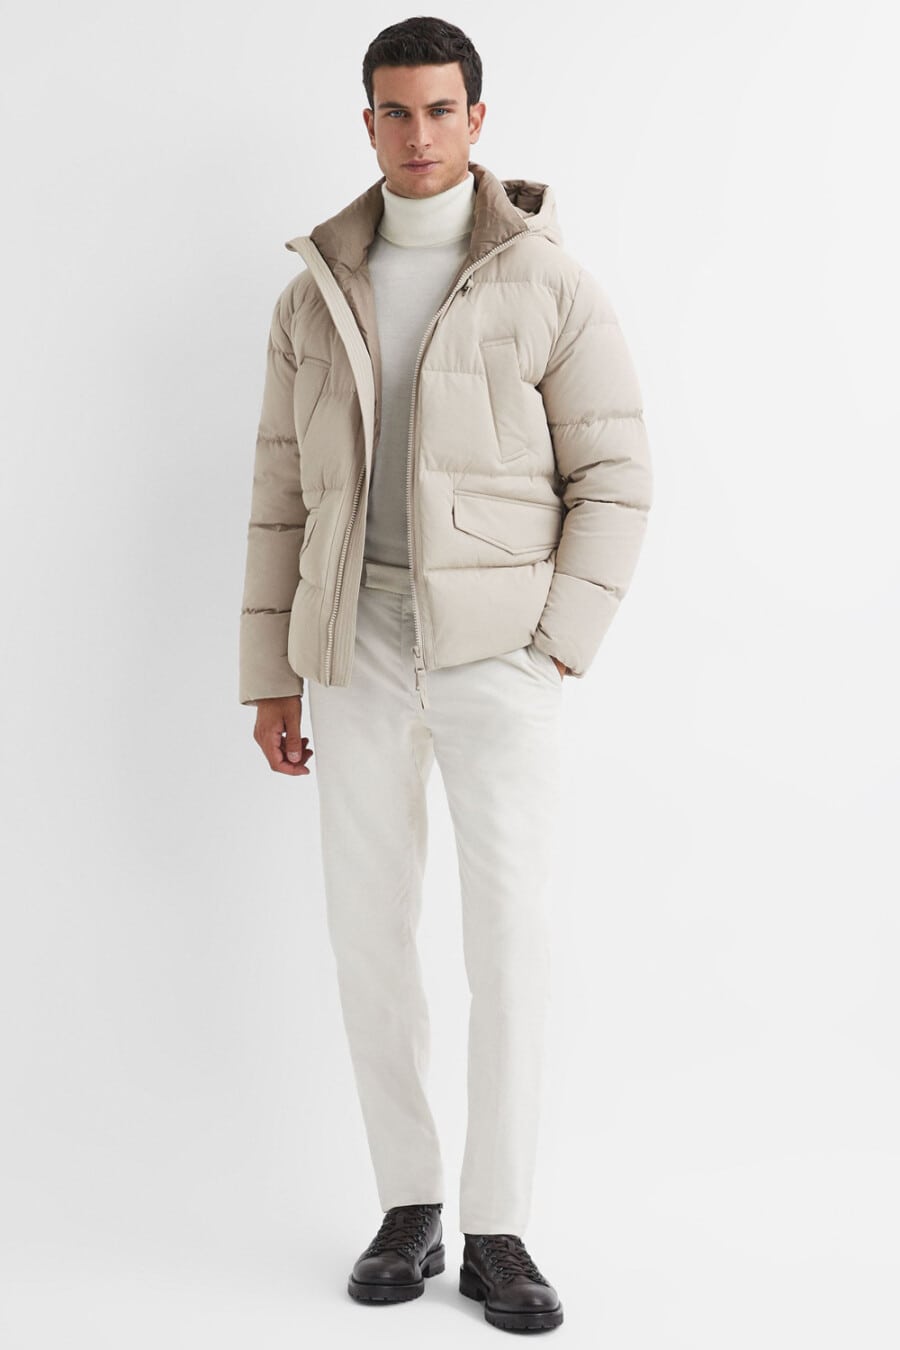 Men's white tailored pants, white turtleneck, off white puffer jacket and brown leather boots outfit